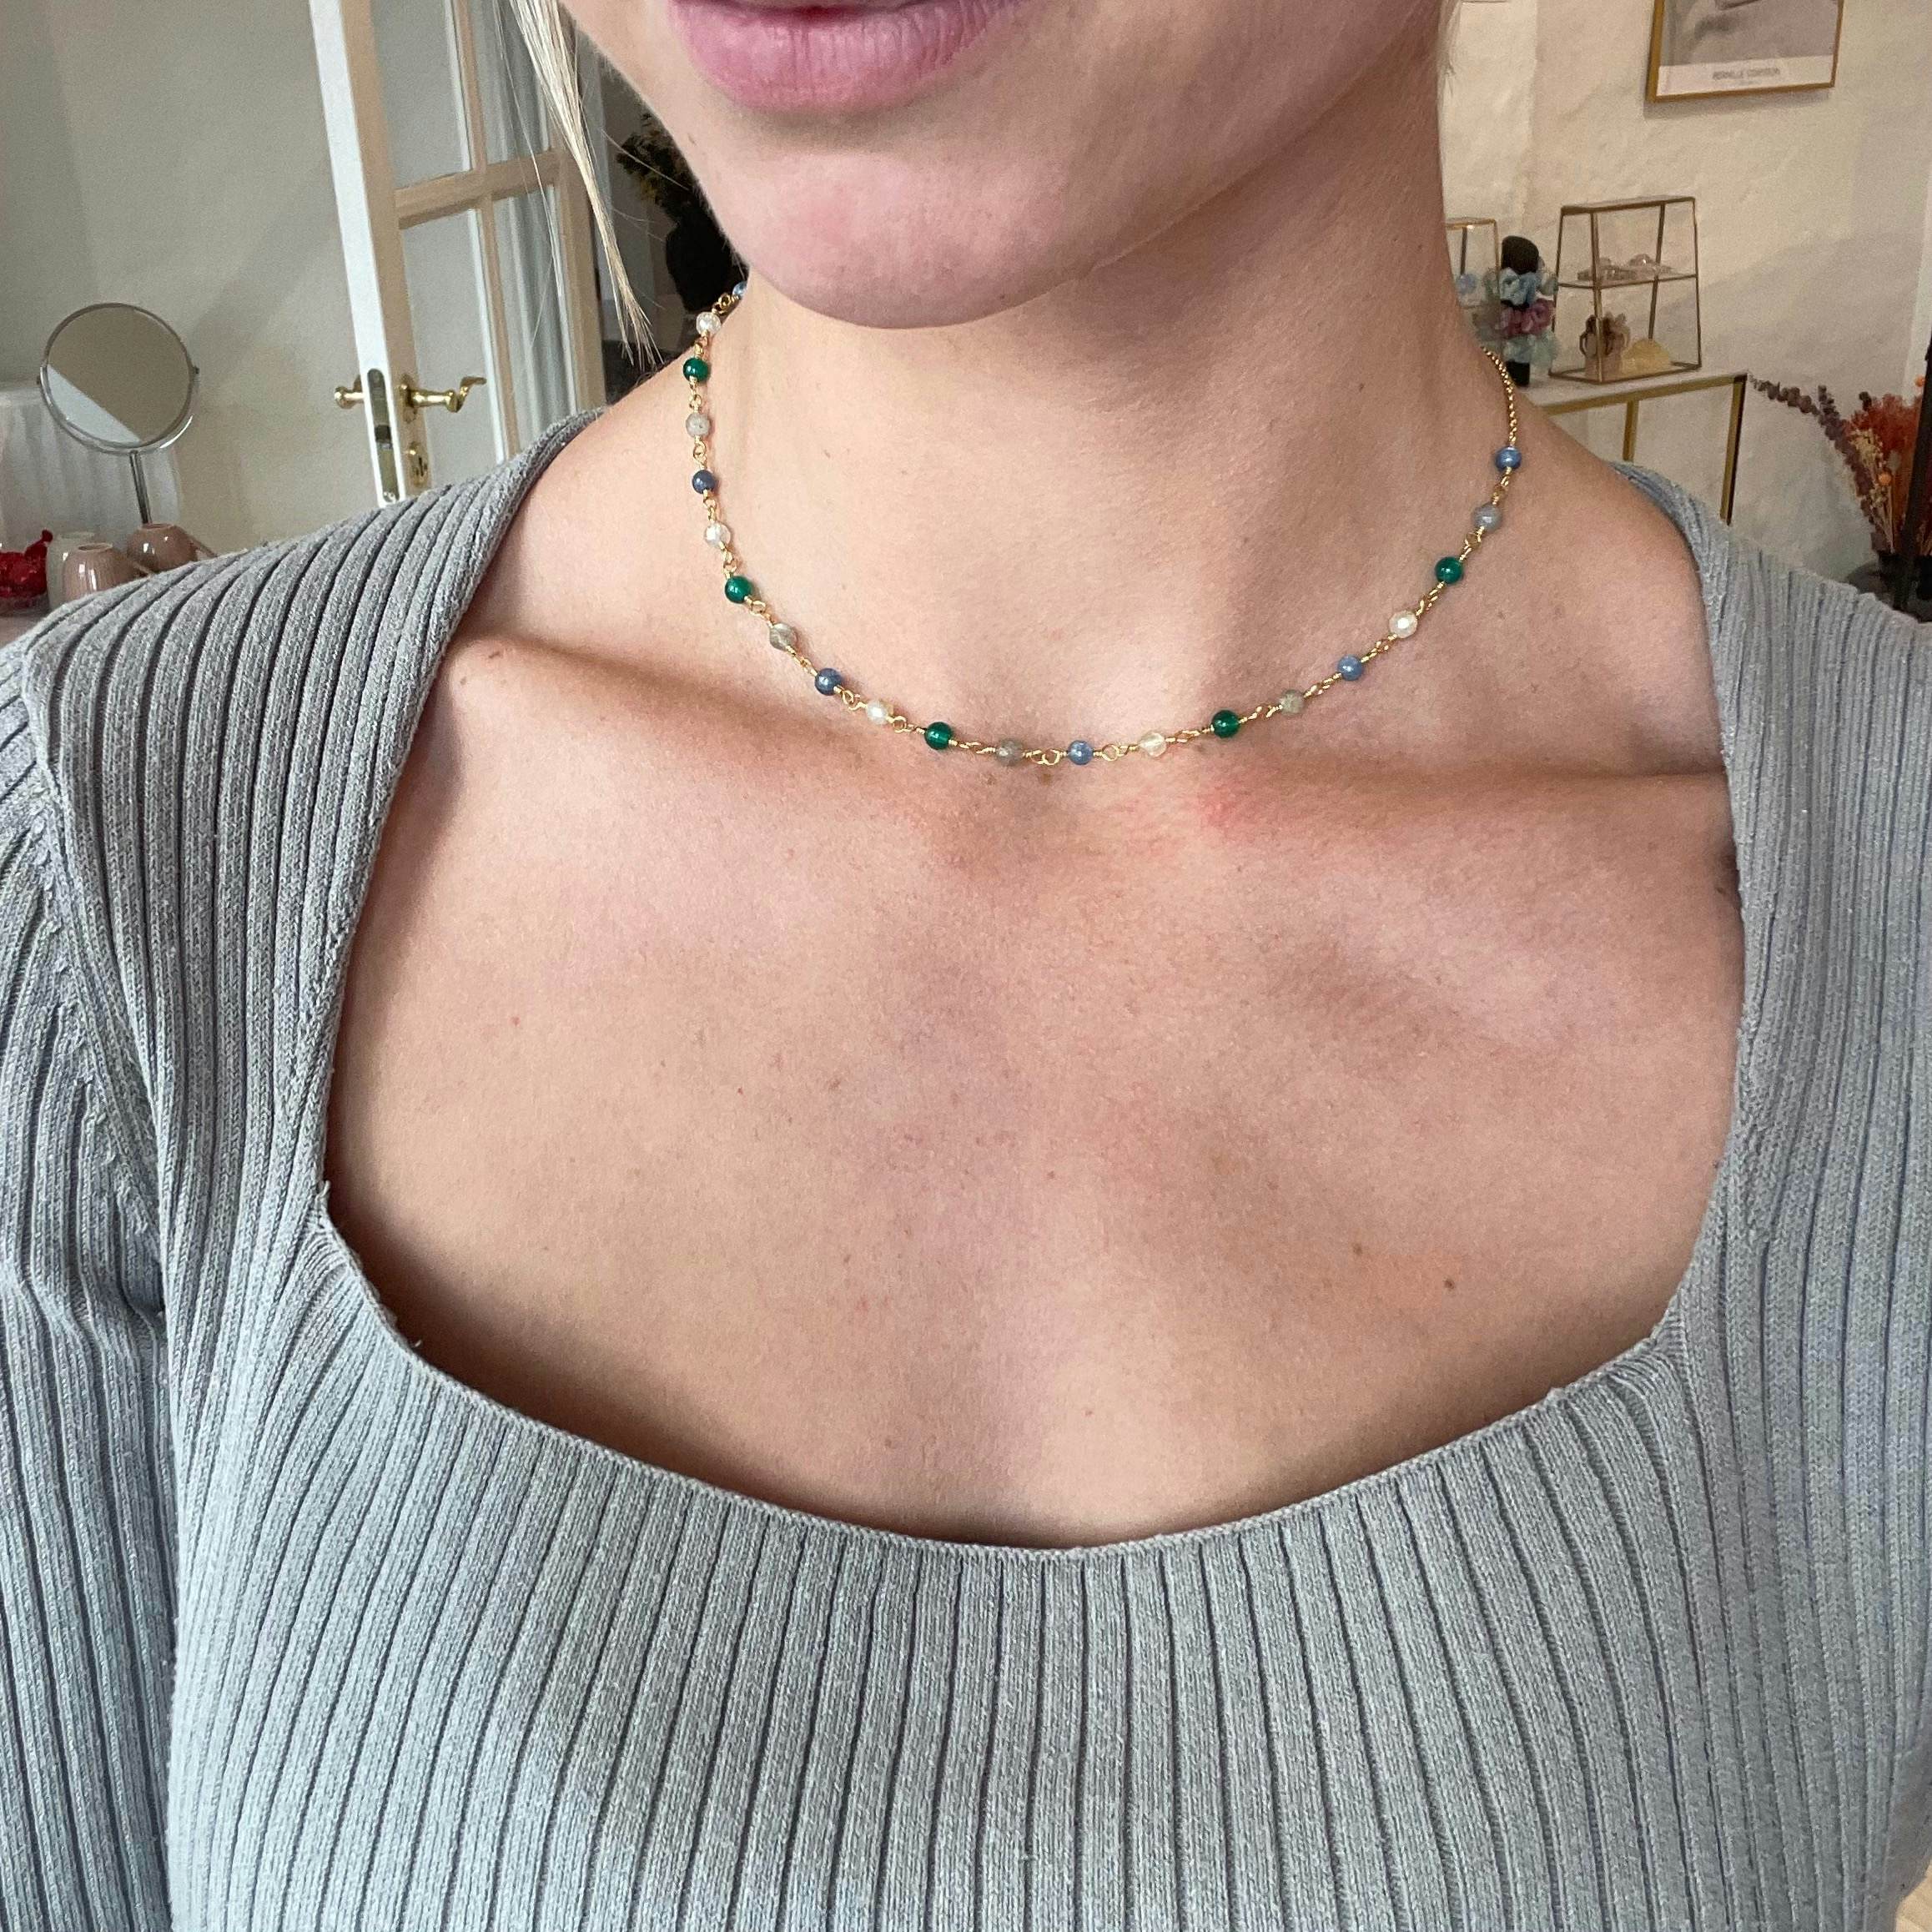 Gem Candy Necklace Confidence from Carré in Goldplated-Silver Sterling 925| , Green Agat, Labradorit,Kyanit